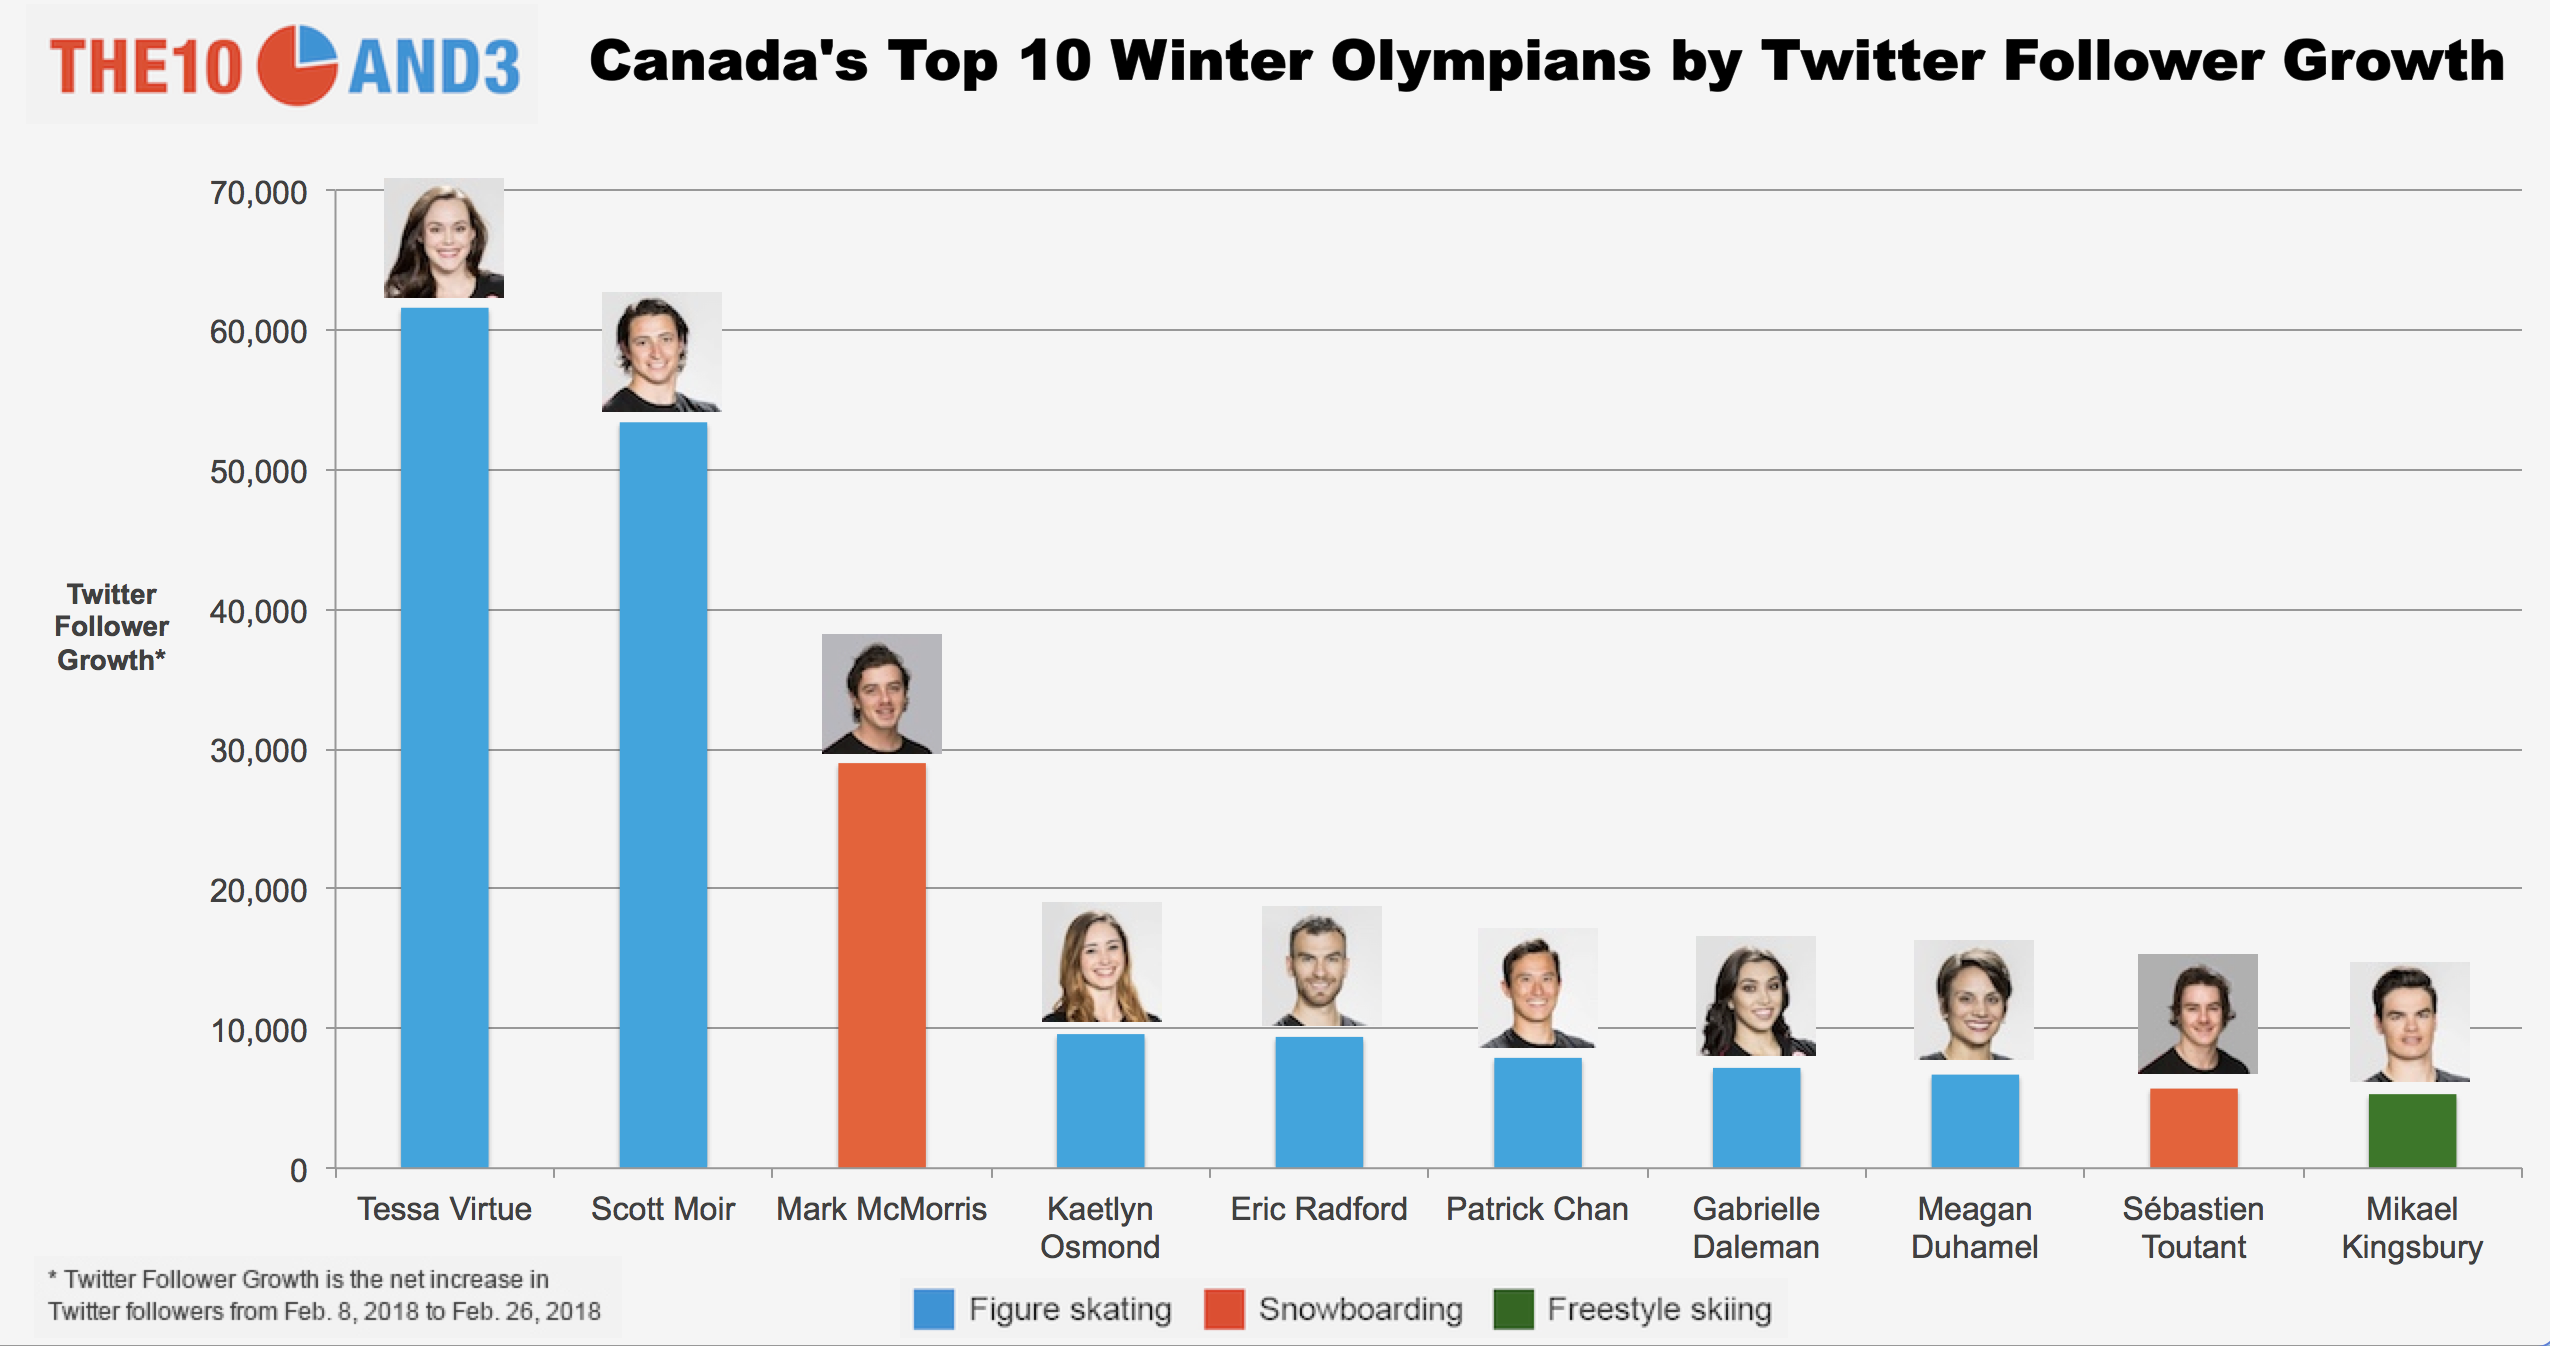 Chart of Canada's Top 10 Winter Olympians by Twitter Follower Growth